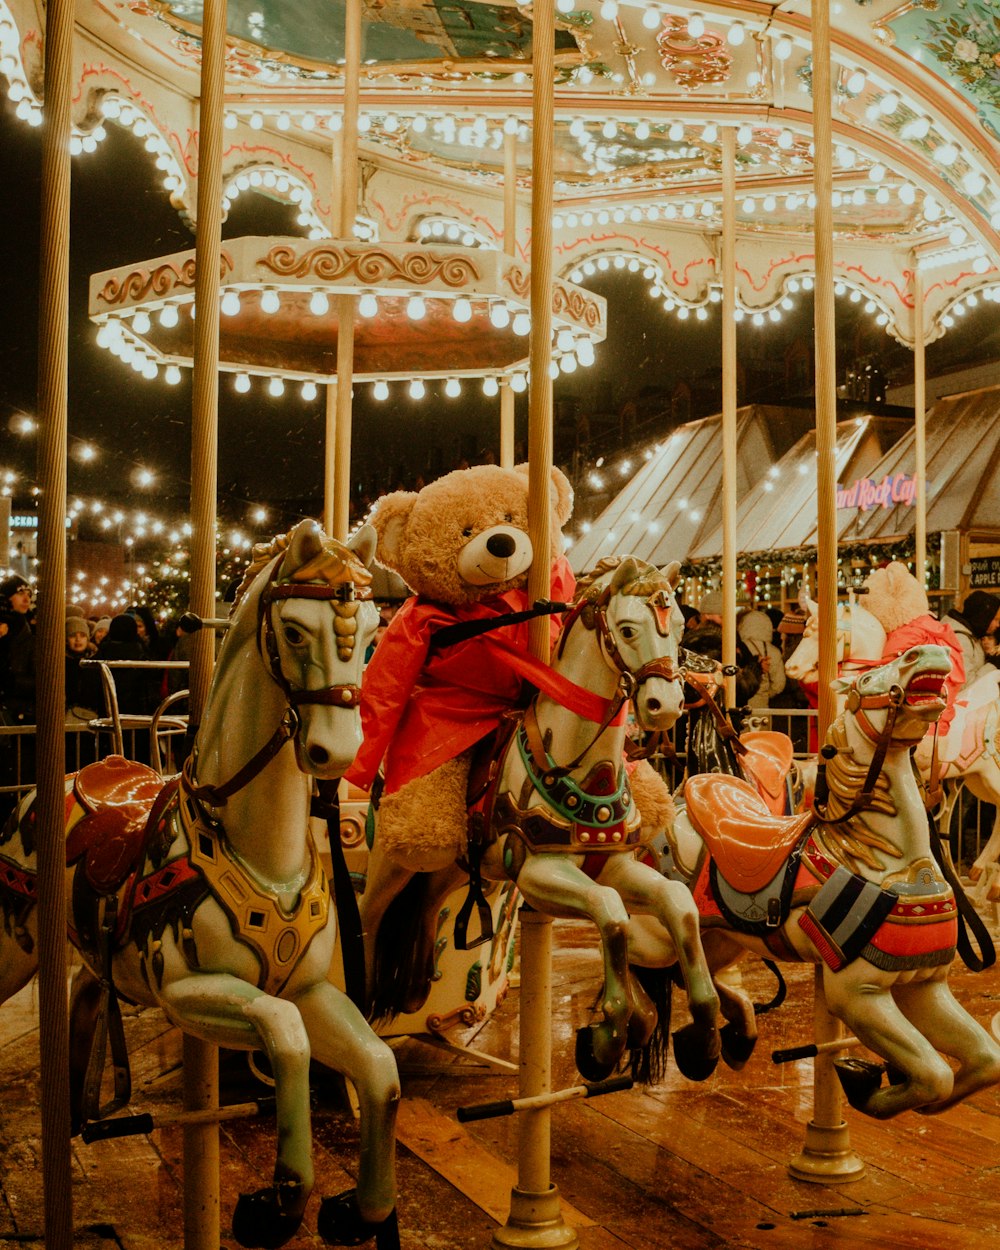 a group of teddy bears riding on top of a carousel